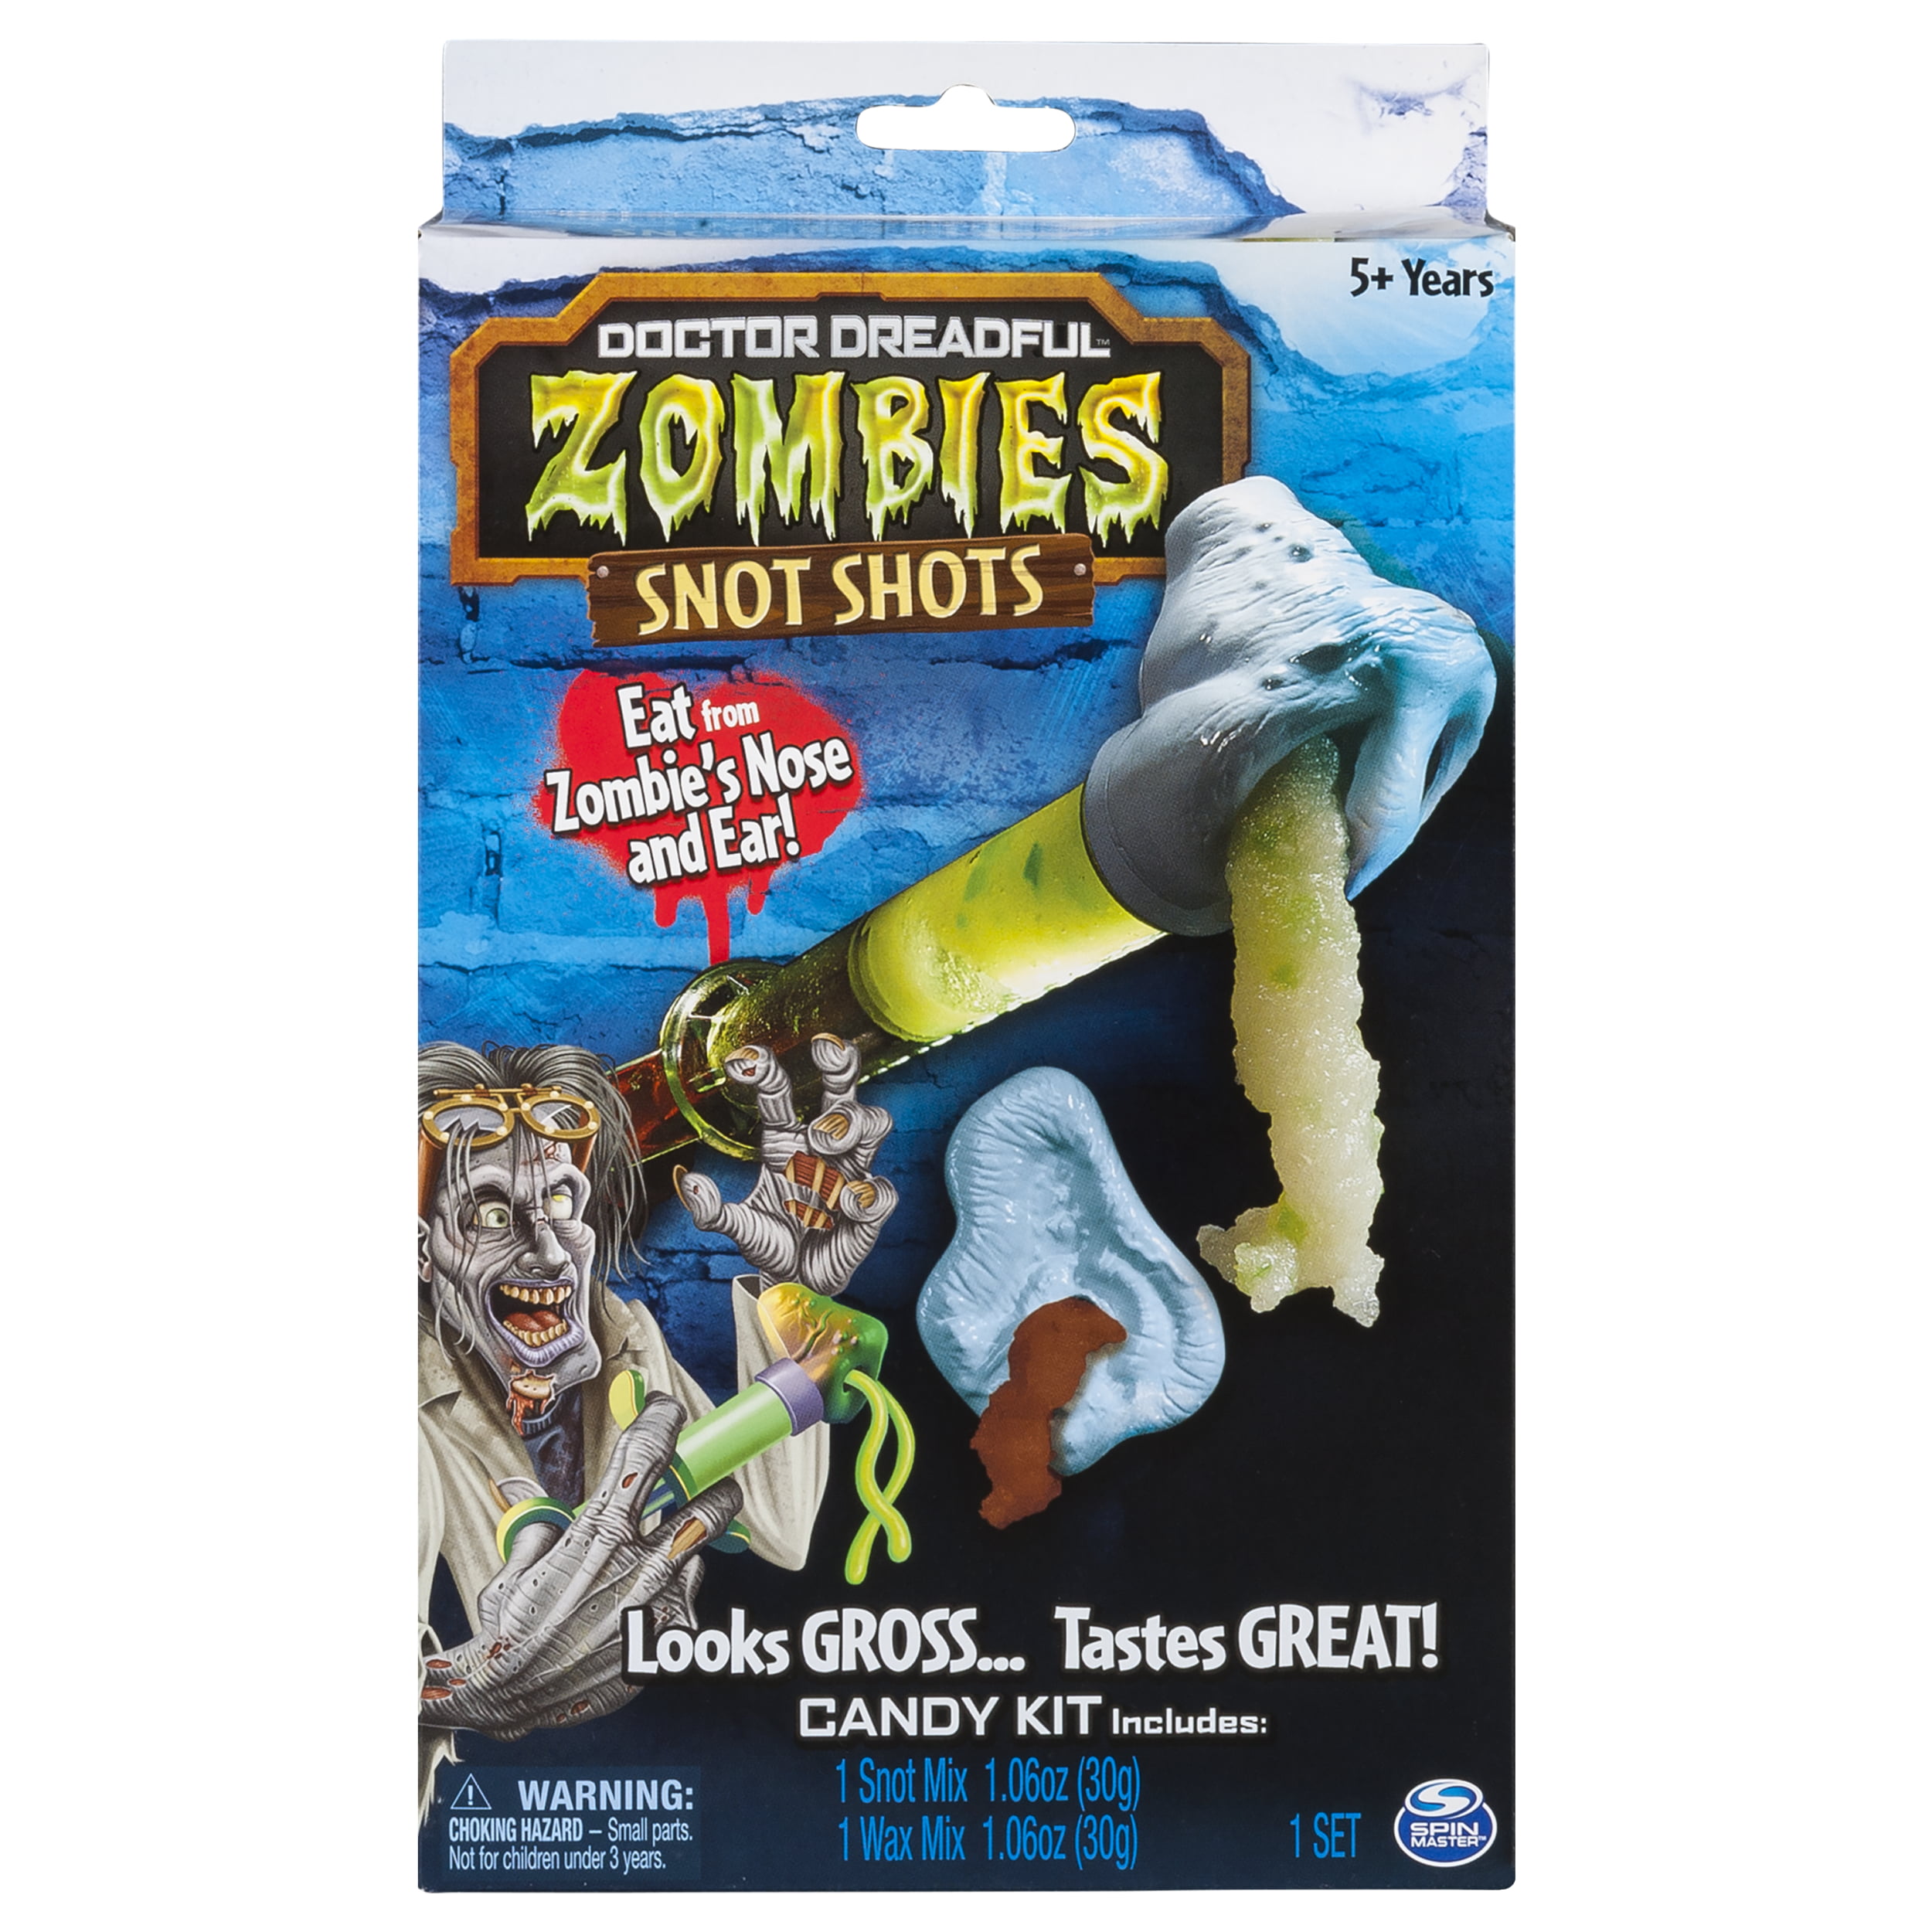 Doctor Dreadful Zombies Snot Shots Candy Mix with Accessories 